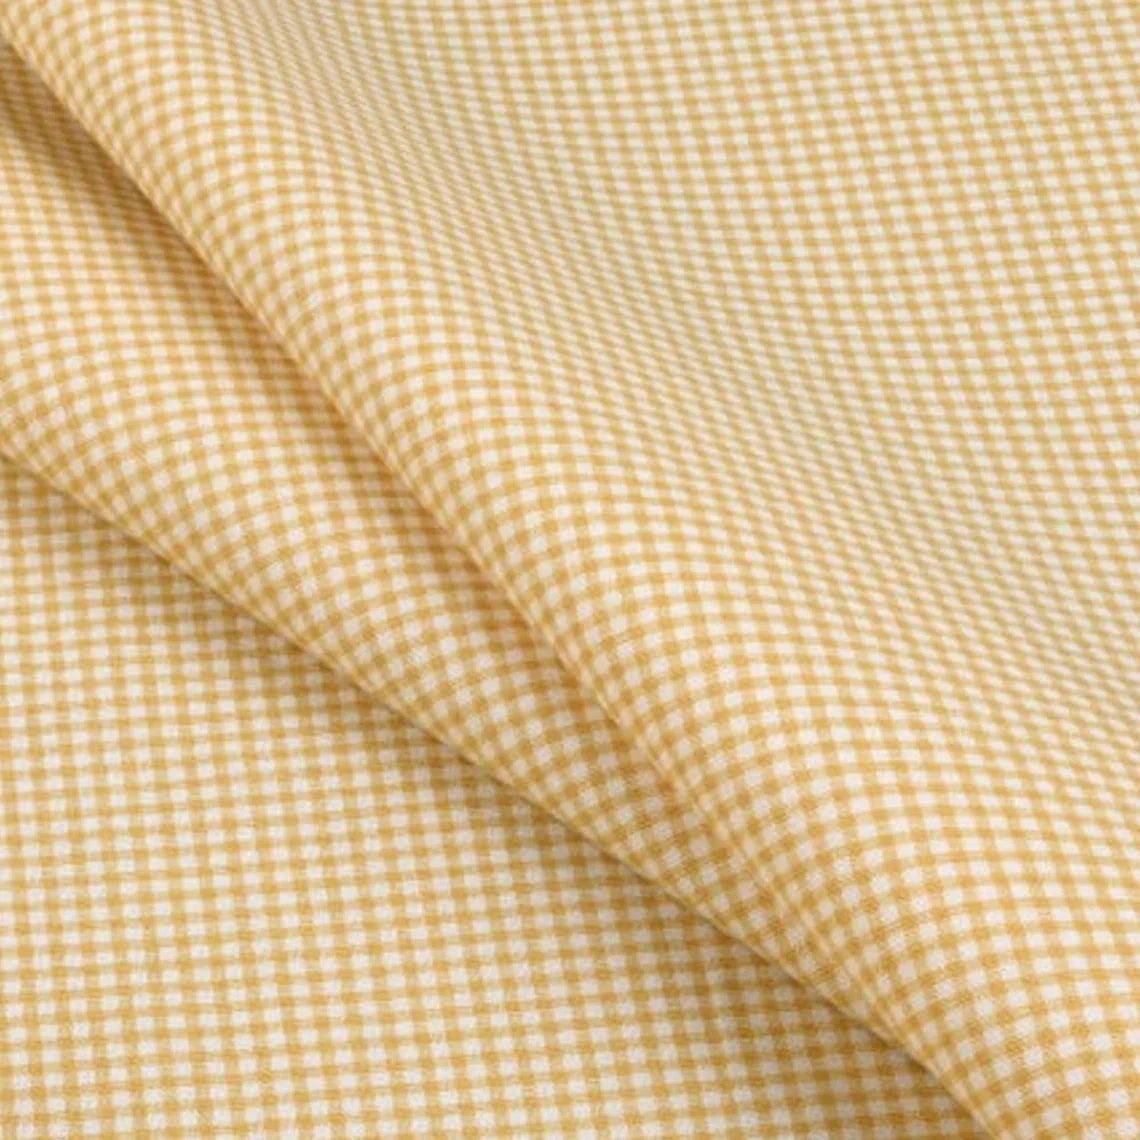 Shower Curtain in Farmhouse Barley Yellow Gold Gingham Check